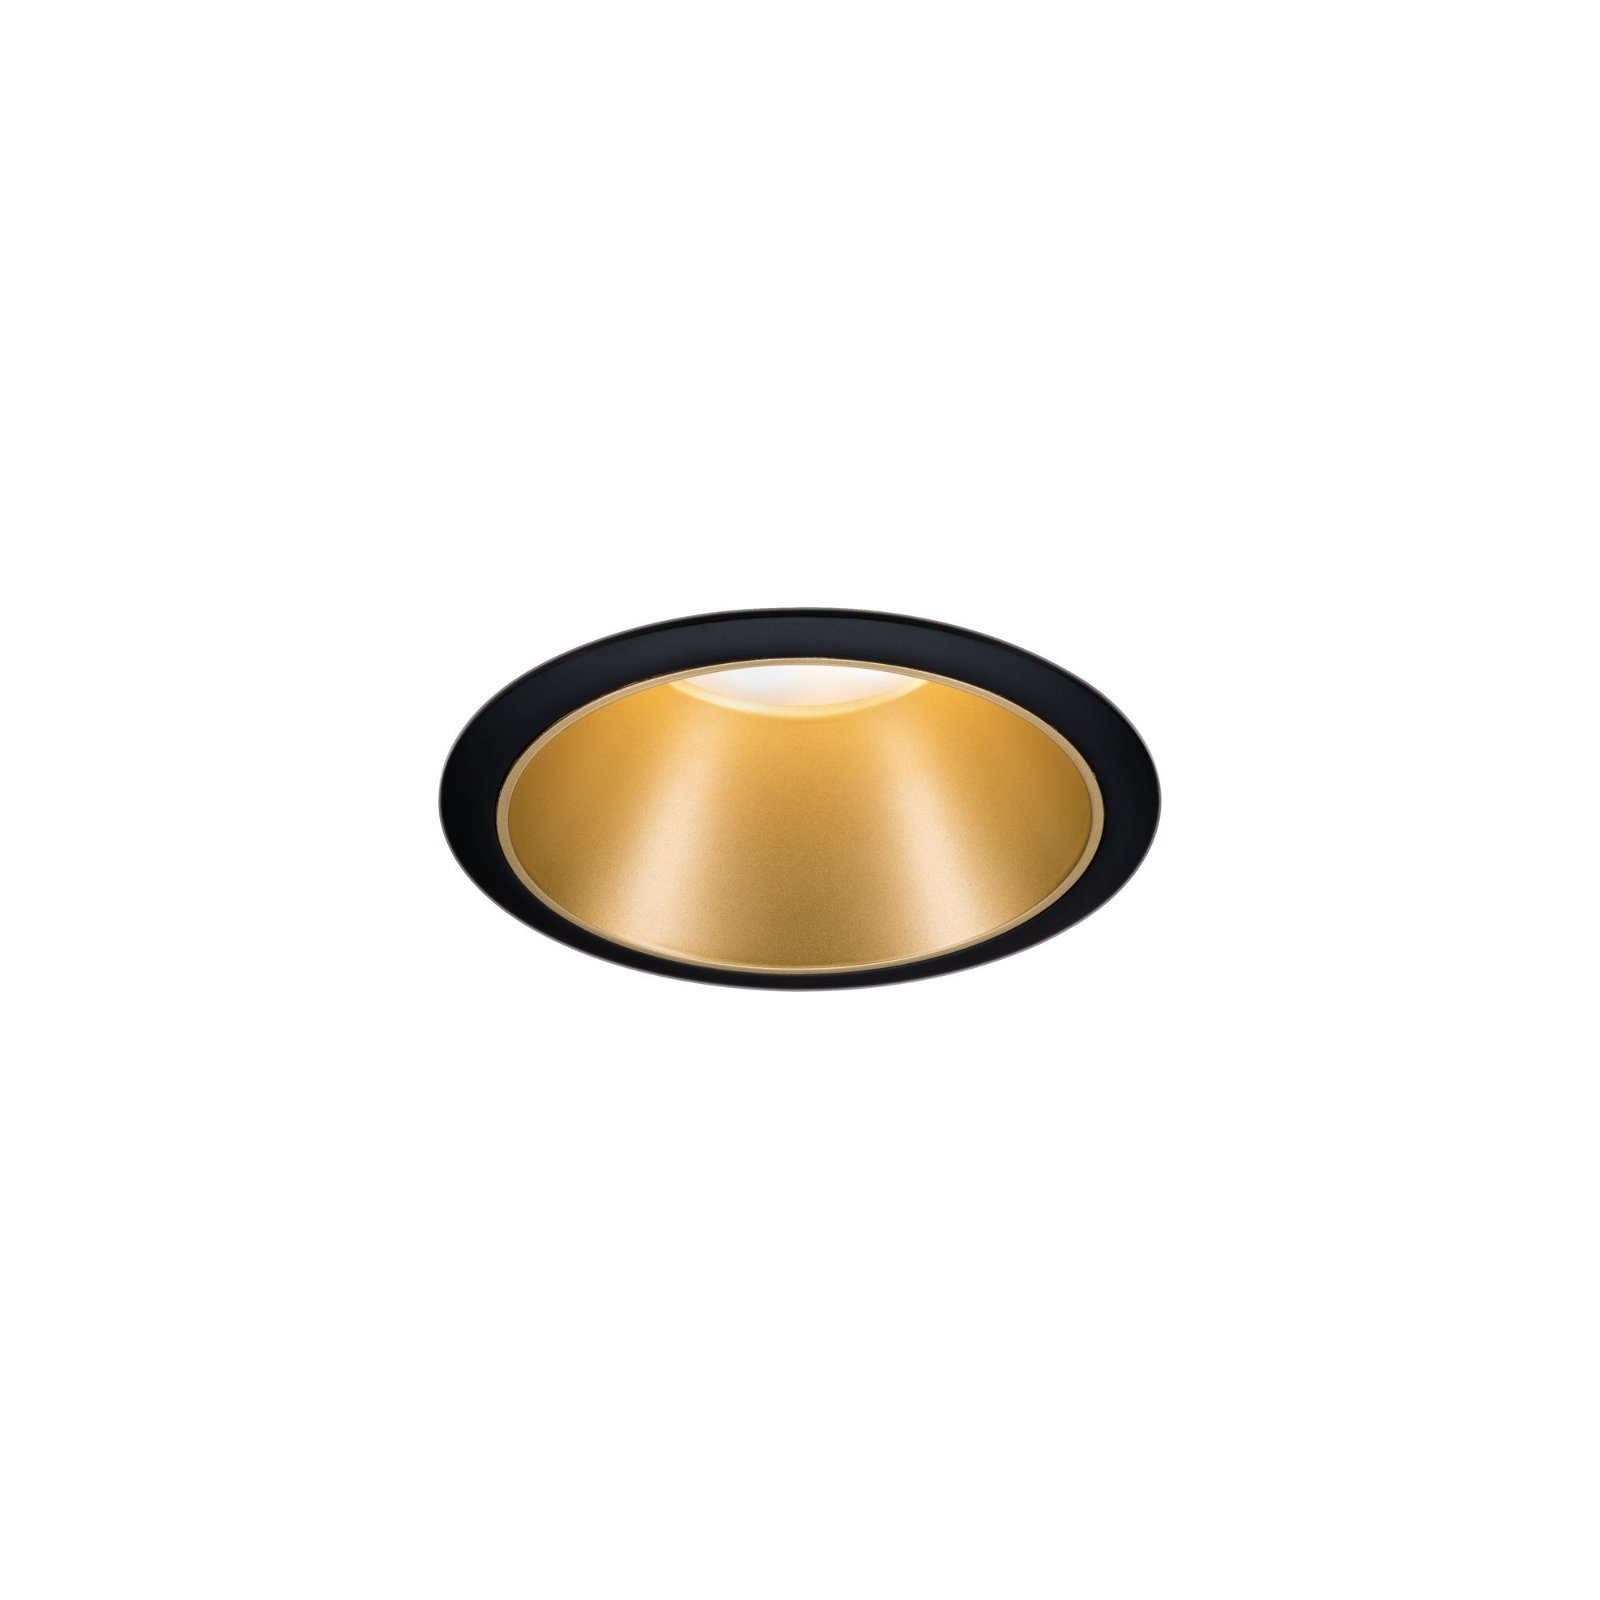 LED Recessed luminaire 3-Step-Dim Cole Coin Basic Set IP44 round 88mm Coin 3x6,5W 3x460lm 230V dimmable 2700K Black/Gold matt